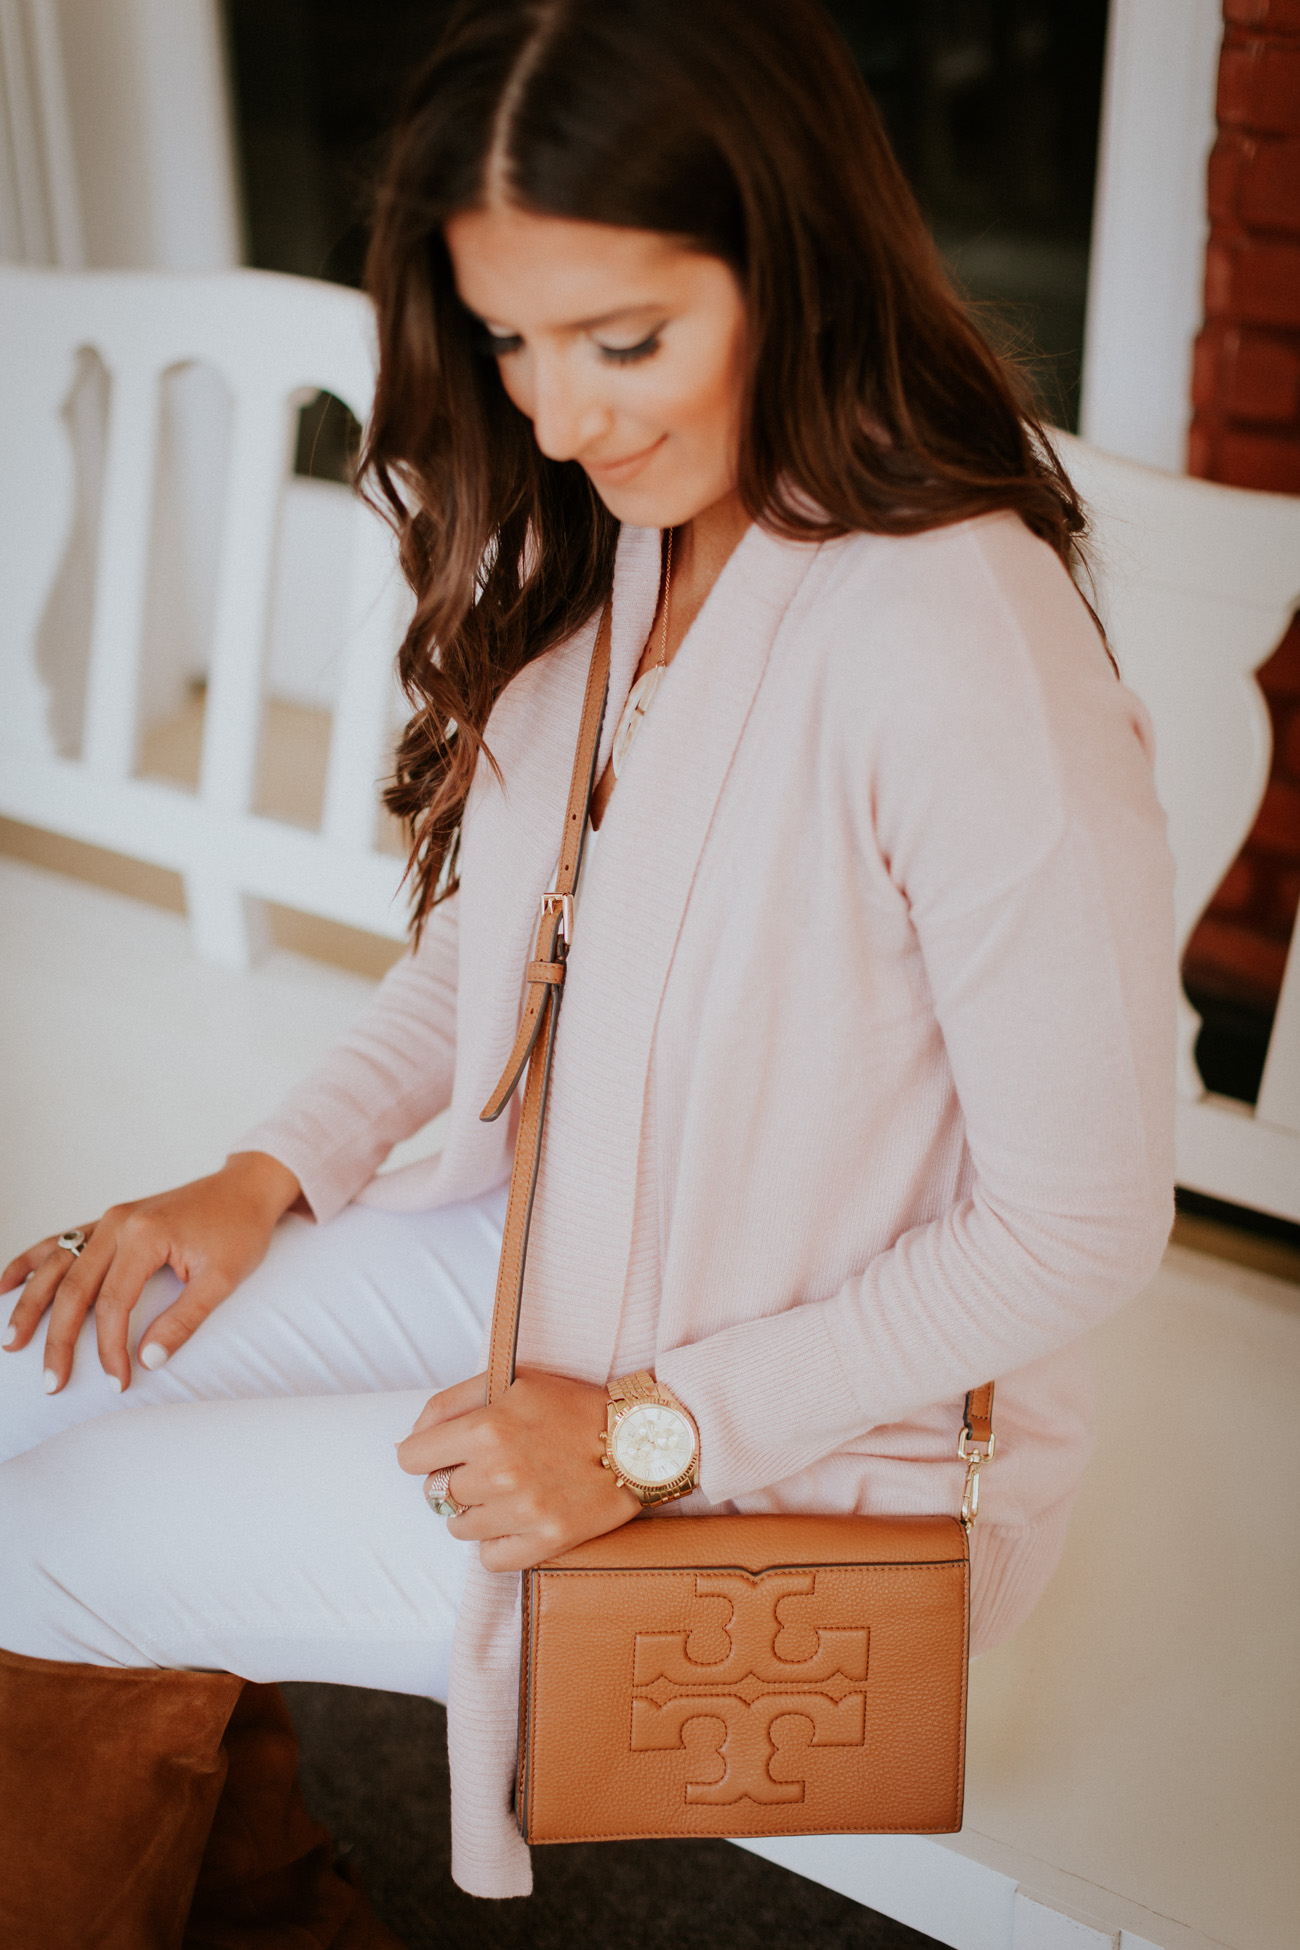 blush pink cardigan, over the knee boots, sam edelman victoria slouch boot, ann taylor open cardigan, omni homestead // grace wainwright a southern drawl